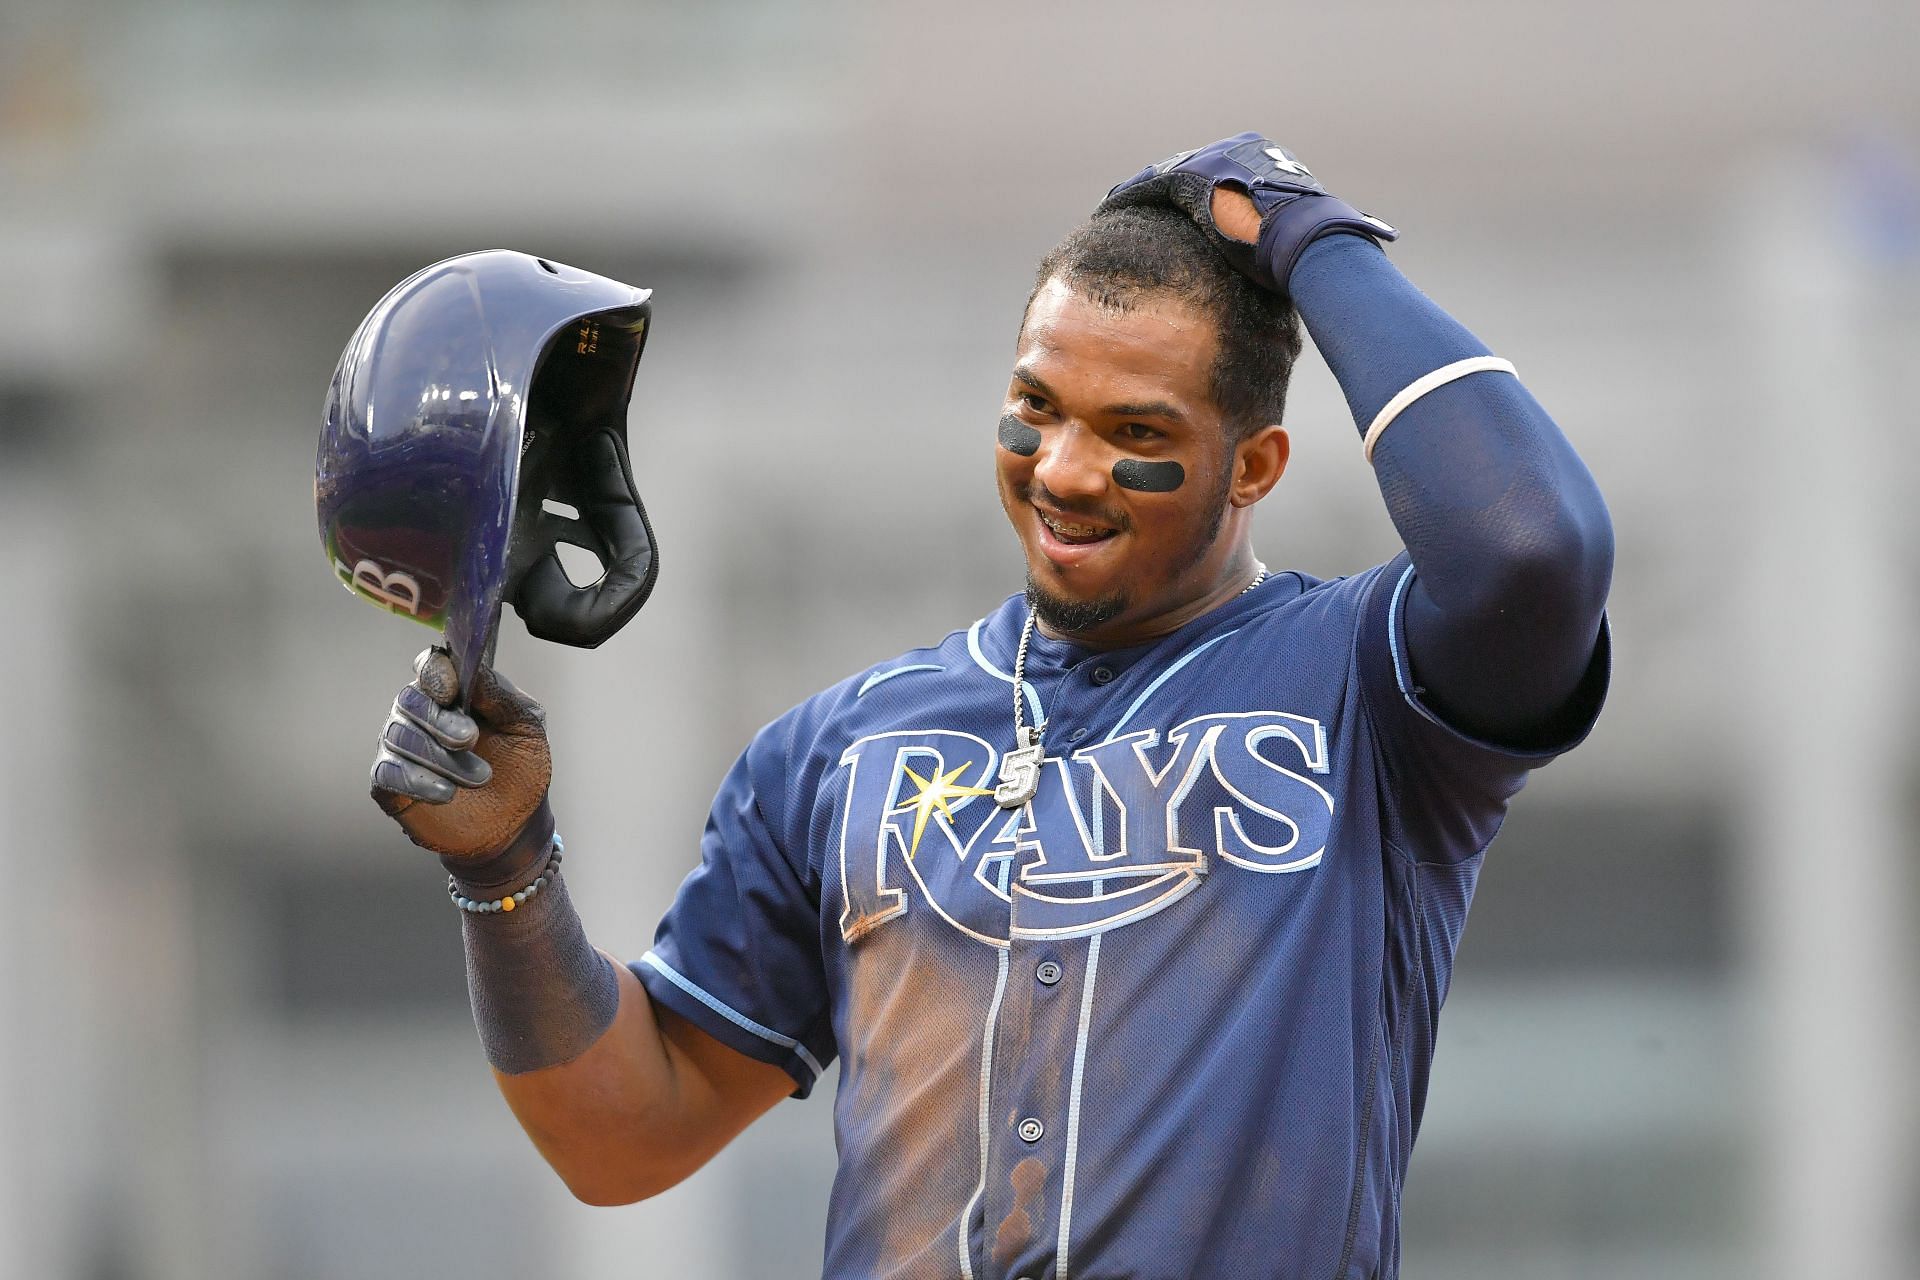 Does Rays' Franco cross the line with hot-doggery ball flip against Pirates?